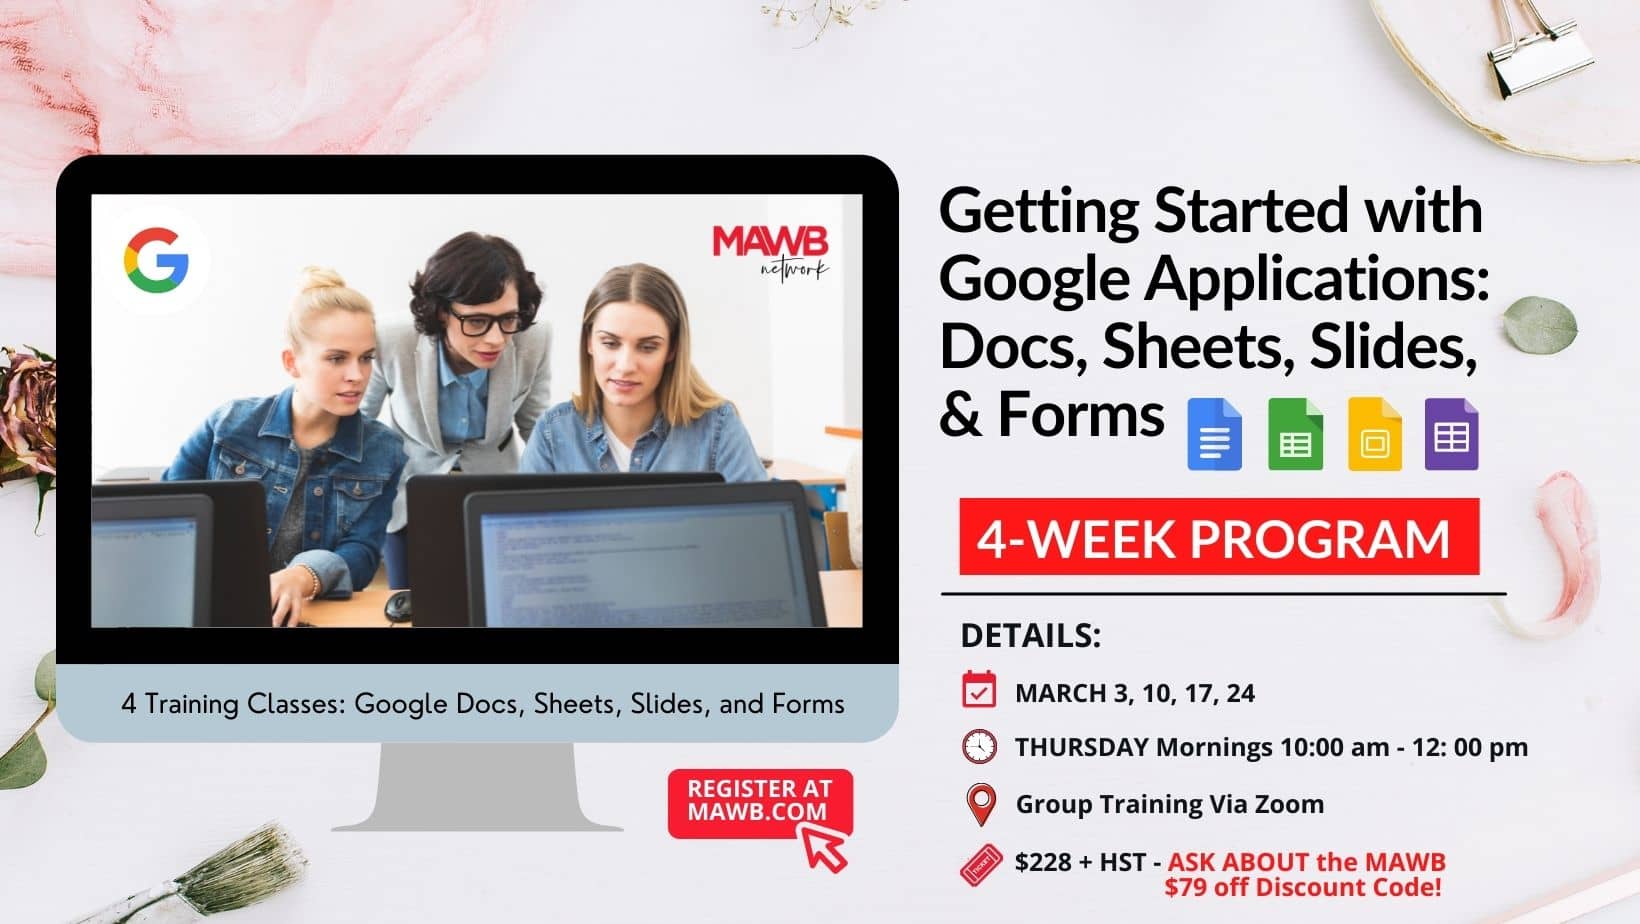 Getting Started with Google Applications: Docs, Sheets, Slides, & Forms